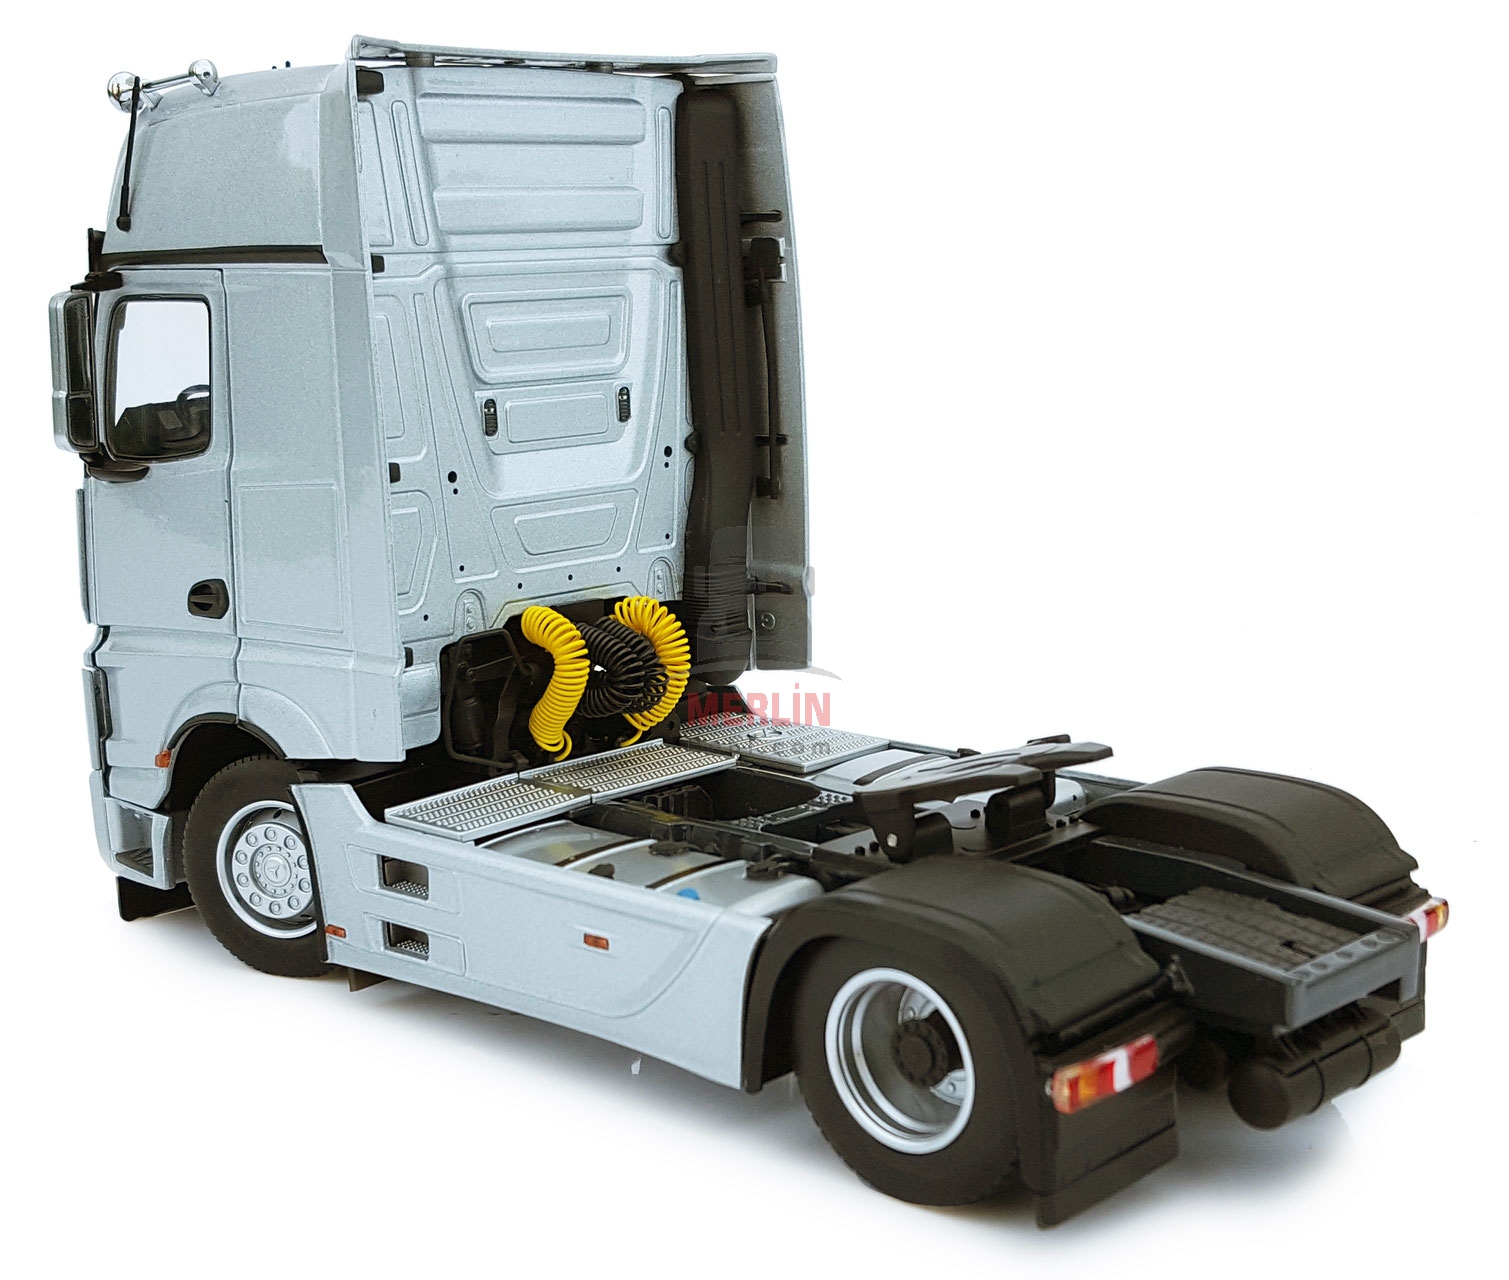 1/32 Marge Mercedes-Benz Actros Gigaspace 4x2 - Gri Renk